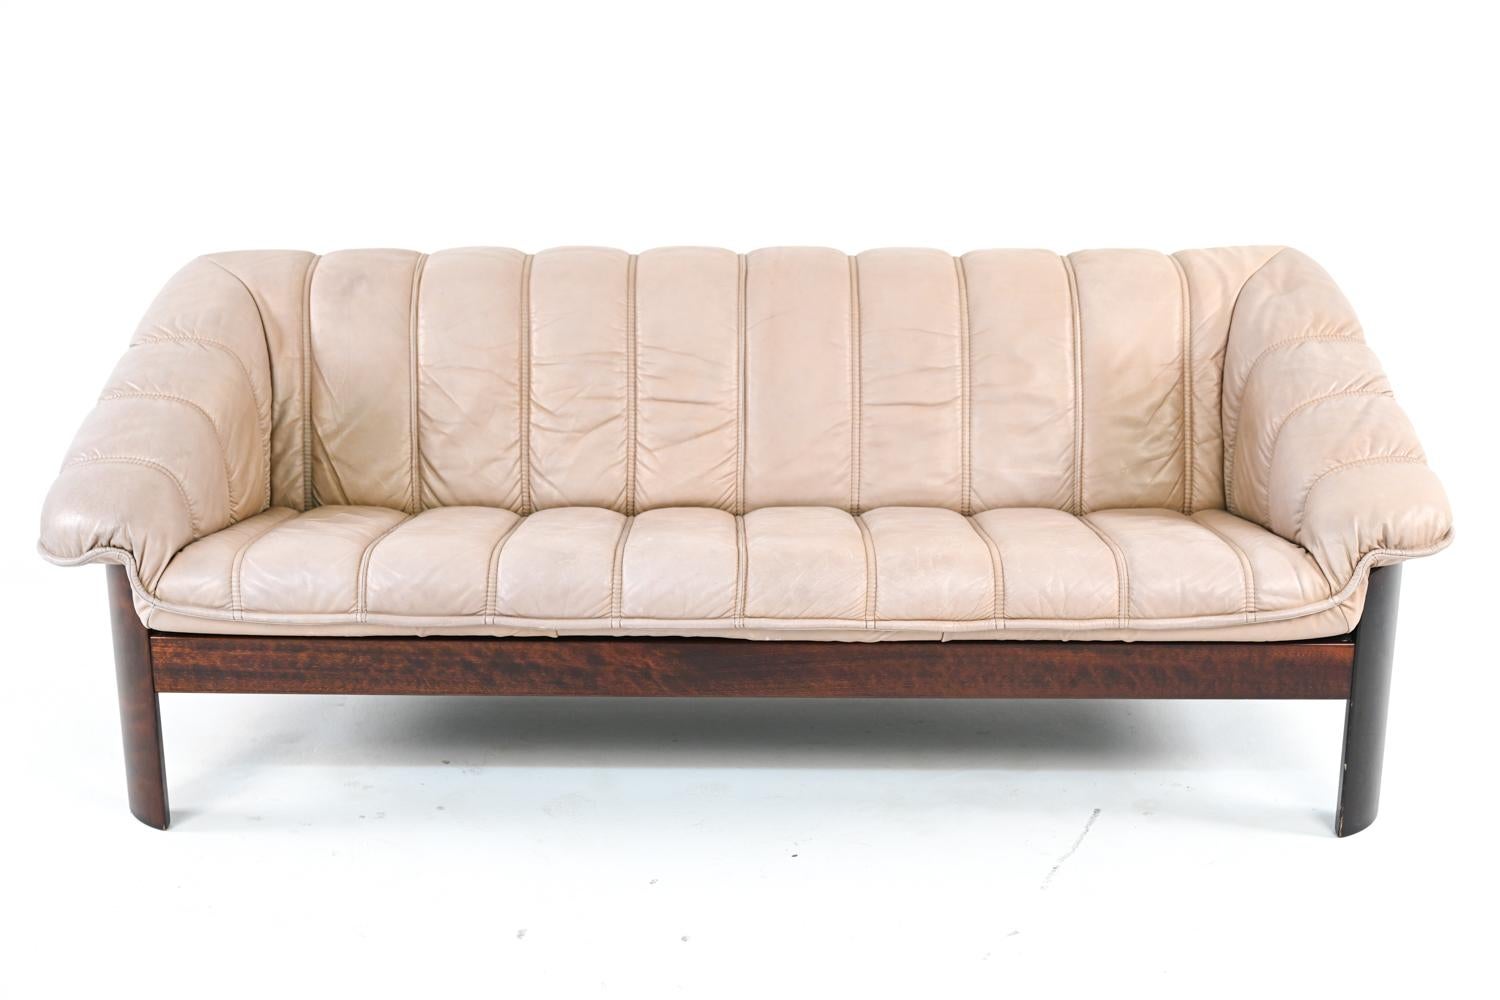 Ekorness Norway Mid-Century Sofa & Loveseat in Taupe Leather For Sale 3